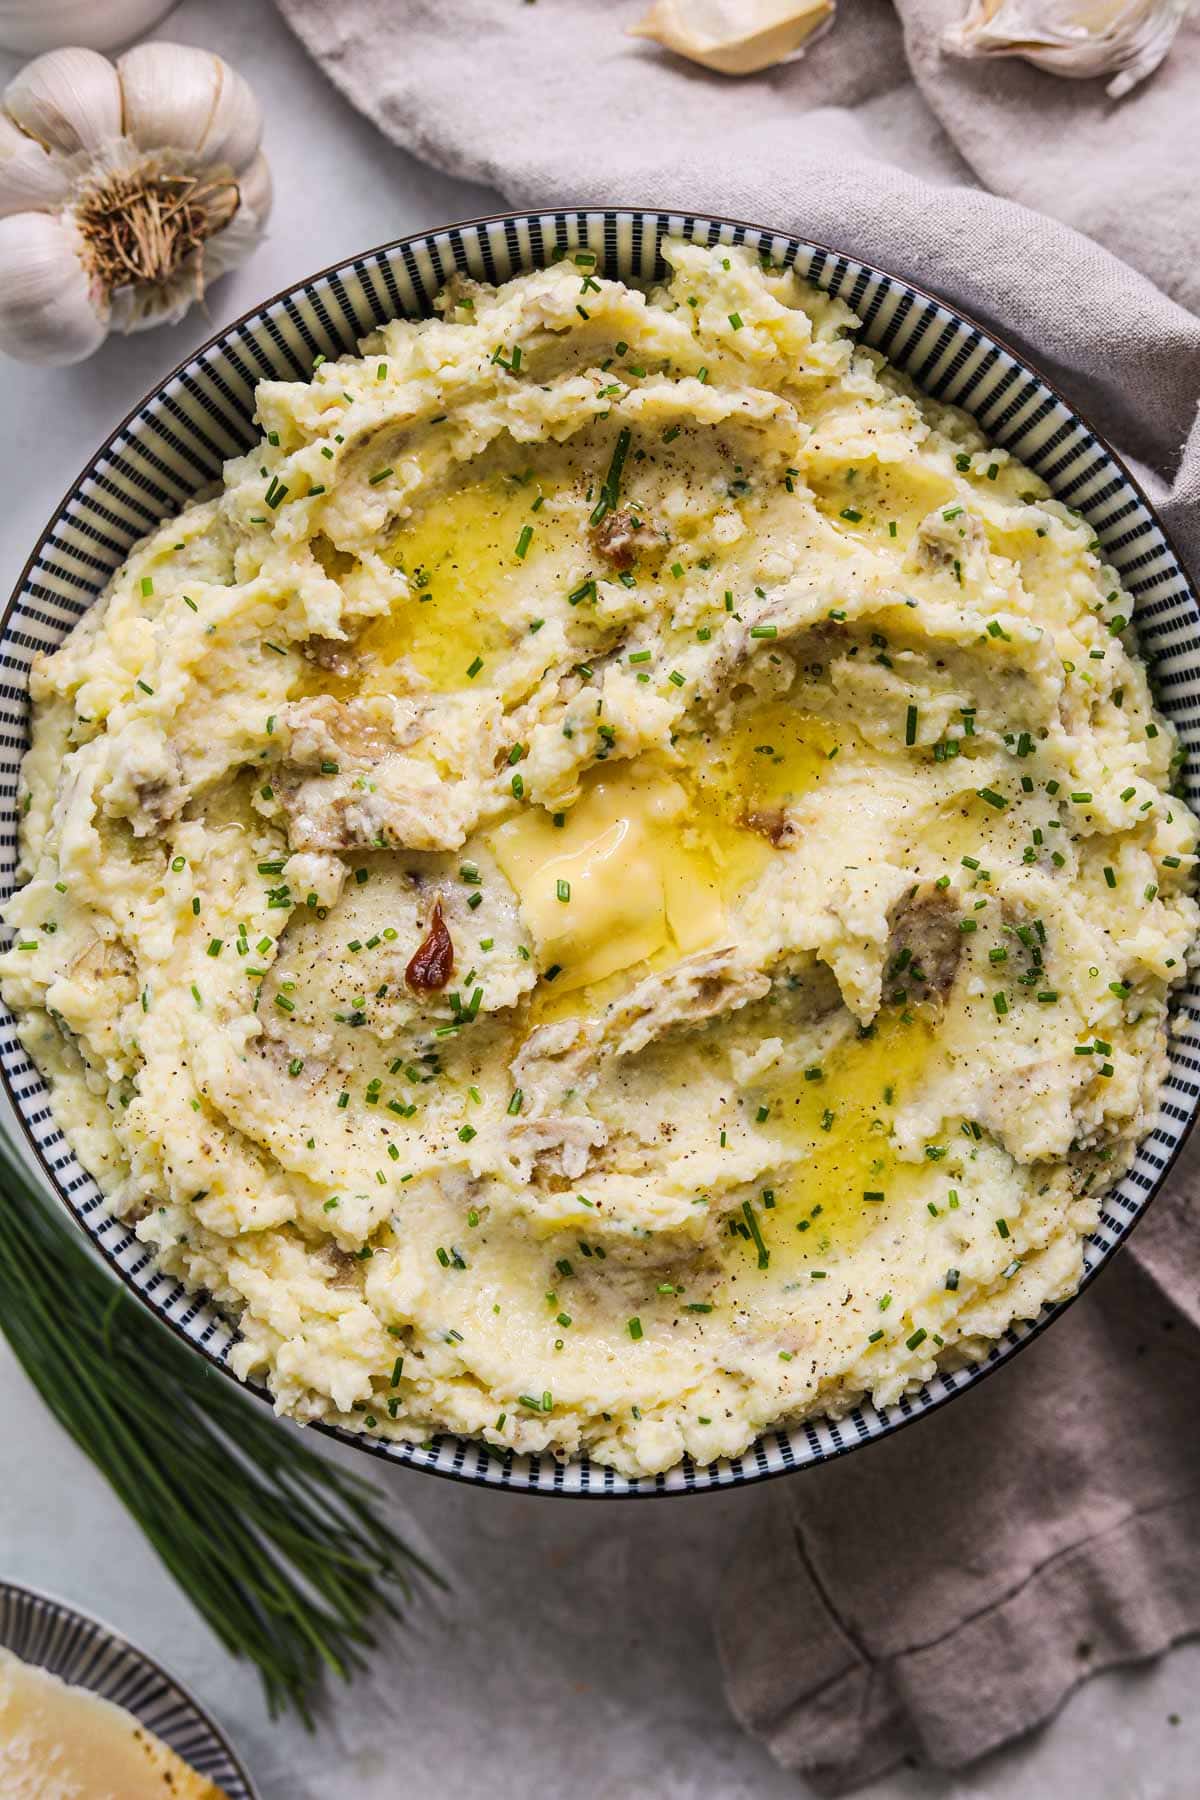 Roasted garlic yukon mashed potatoes with parmigiano-reggiano, sour cream, creamy roasted garlic, and chives in a striped blue and white bowl.